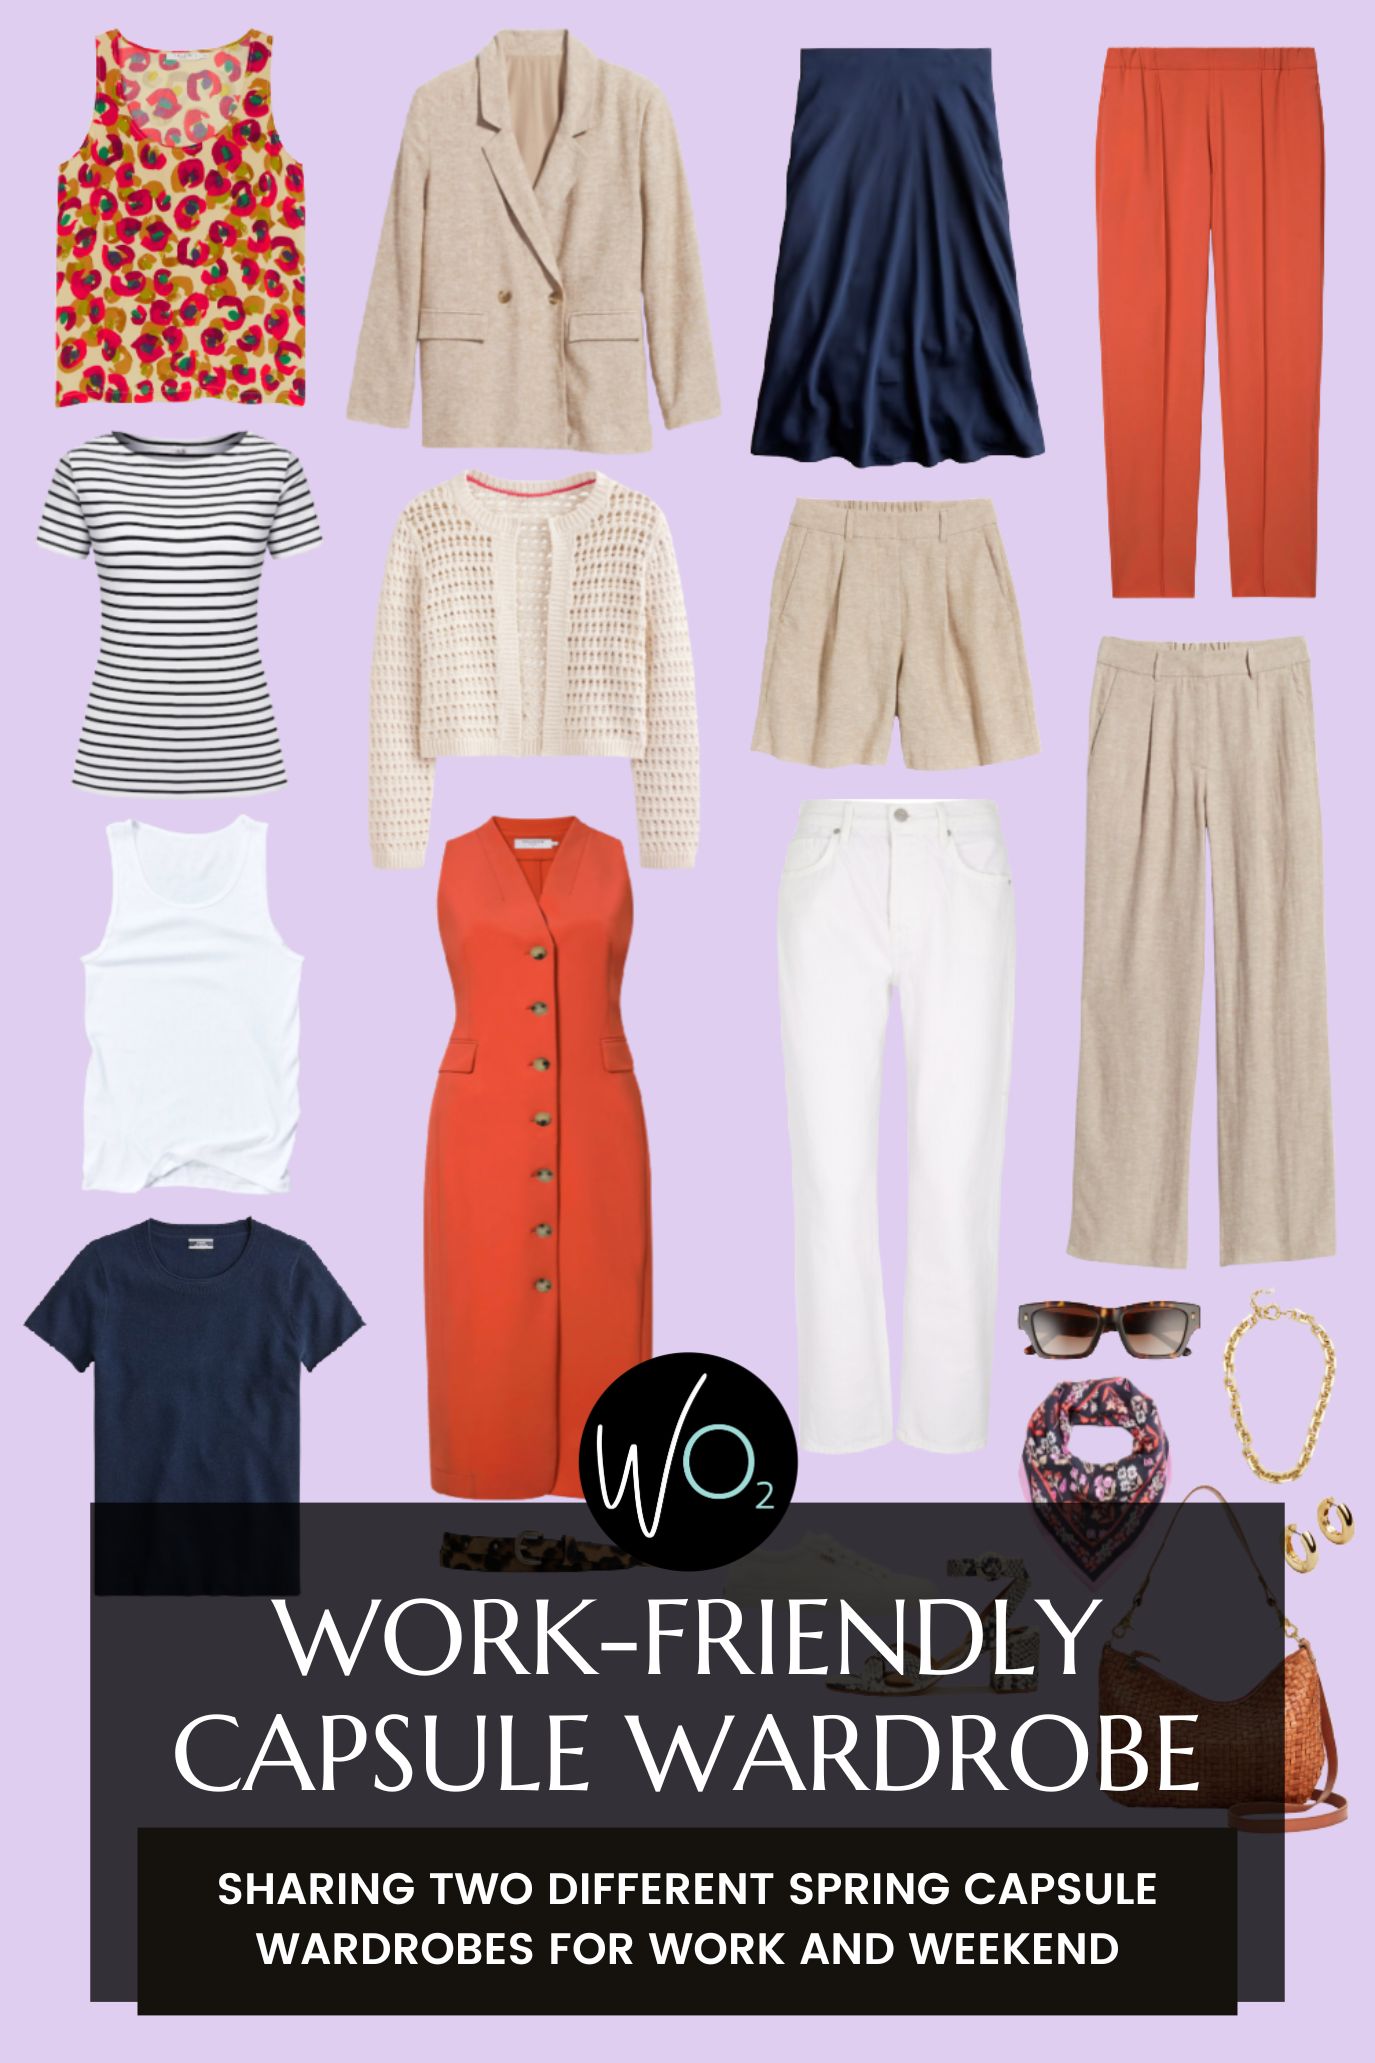 2 Spring Work-Friendly Capsule Wardrobes + Tips To Create Your Own Capsule Wardrobe